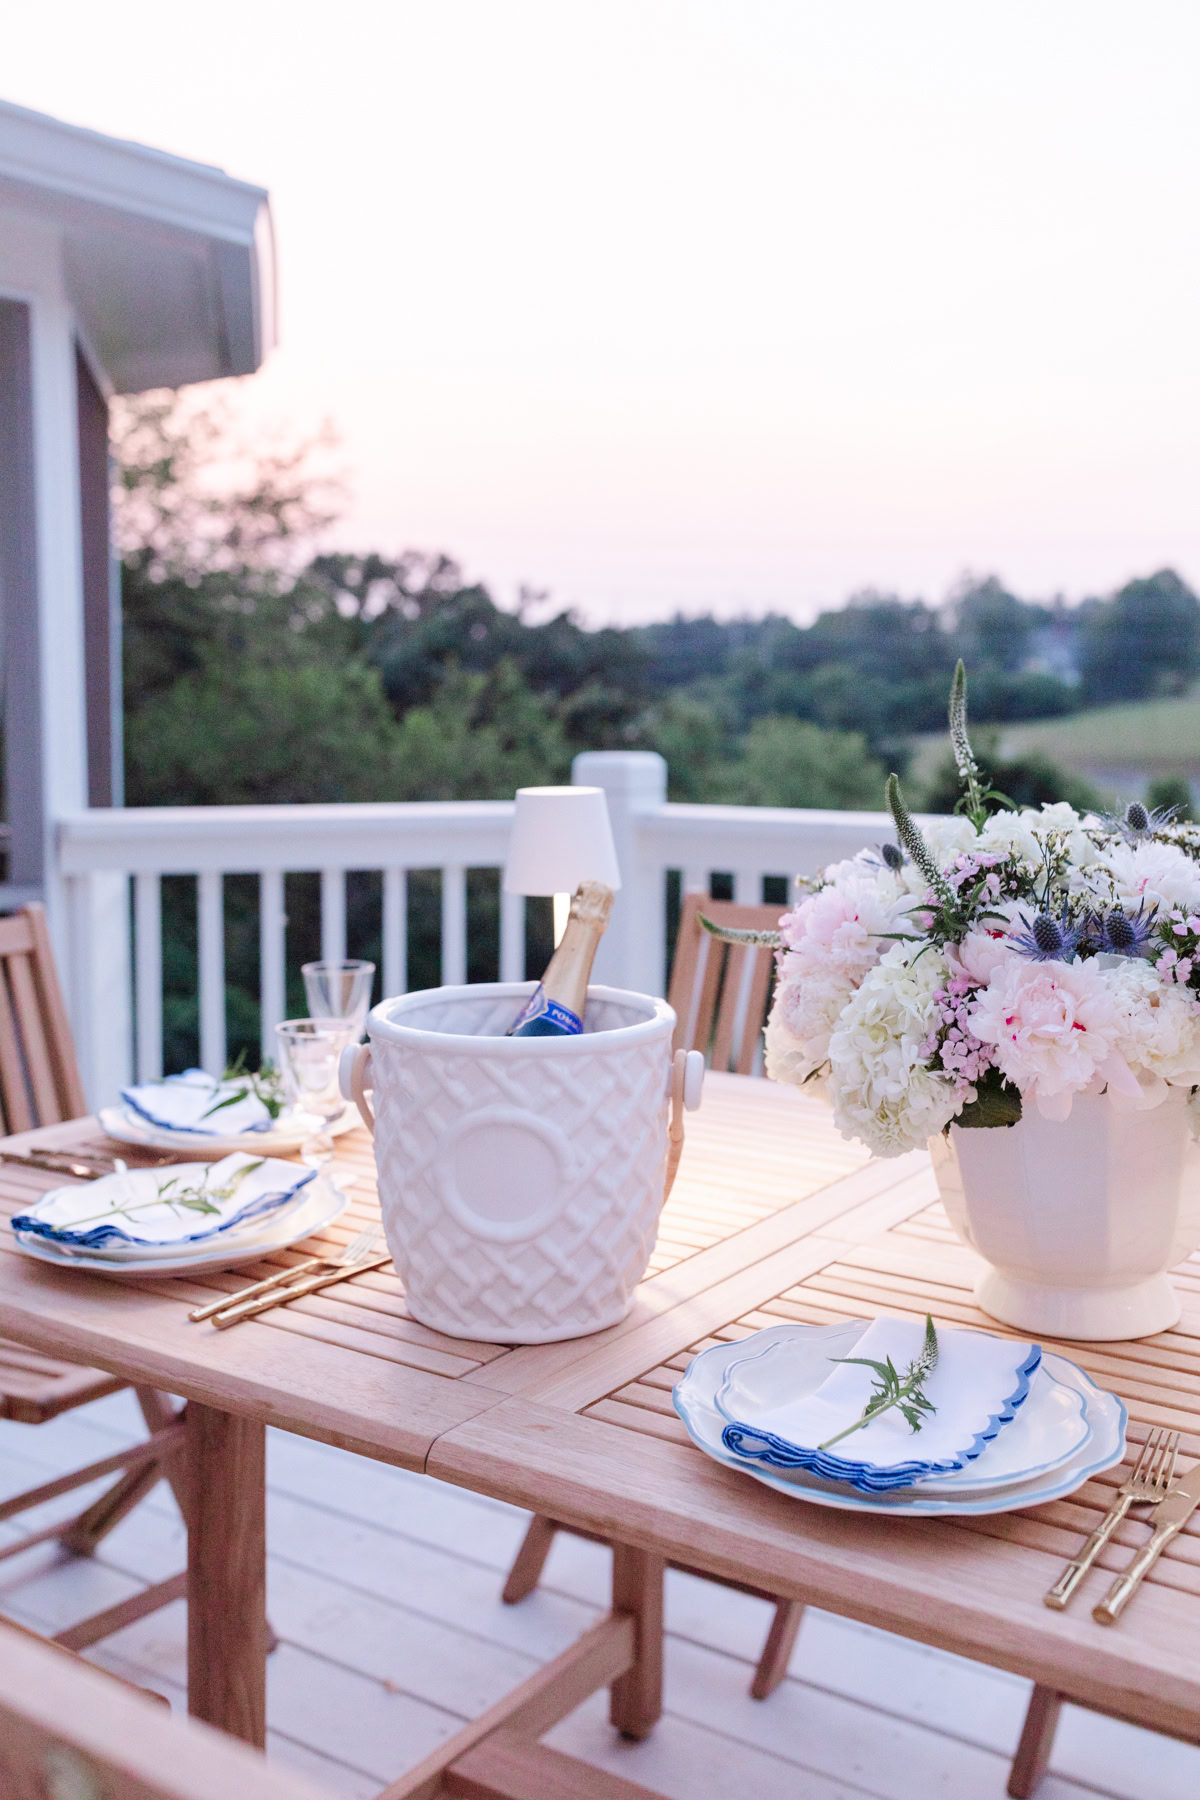 A wooden outdoor dining table set with plates, cutlery, napkins, a white ice bucket with a bottle, and a flower arrangement, overlooking a scenic view with a railing and greenery in the background.